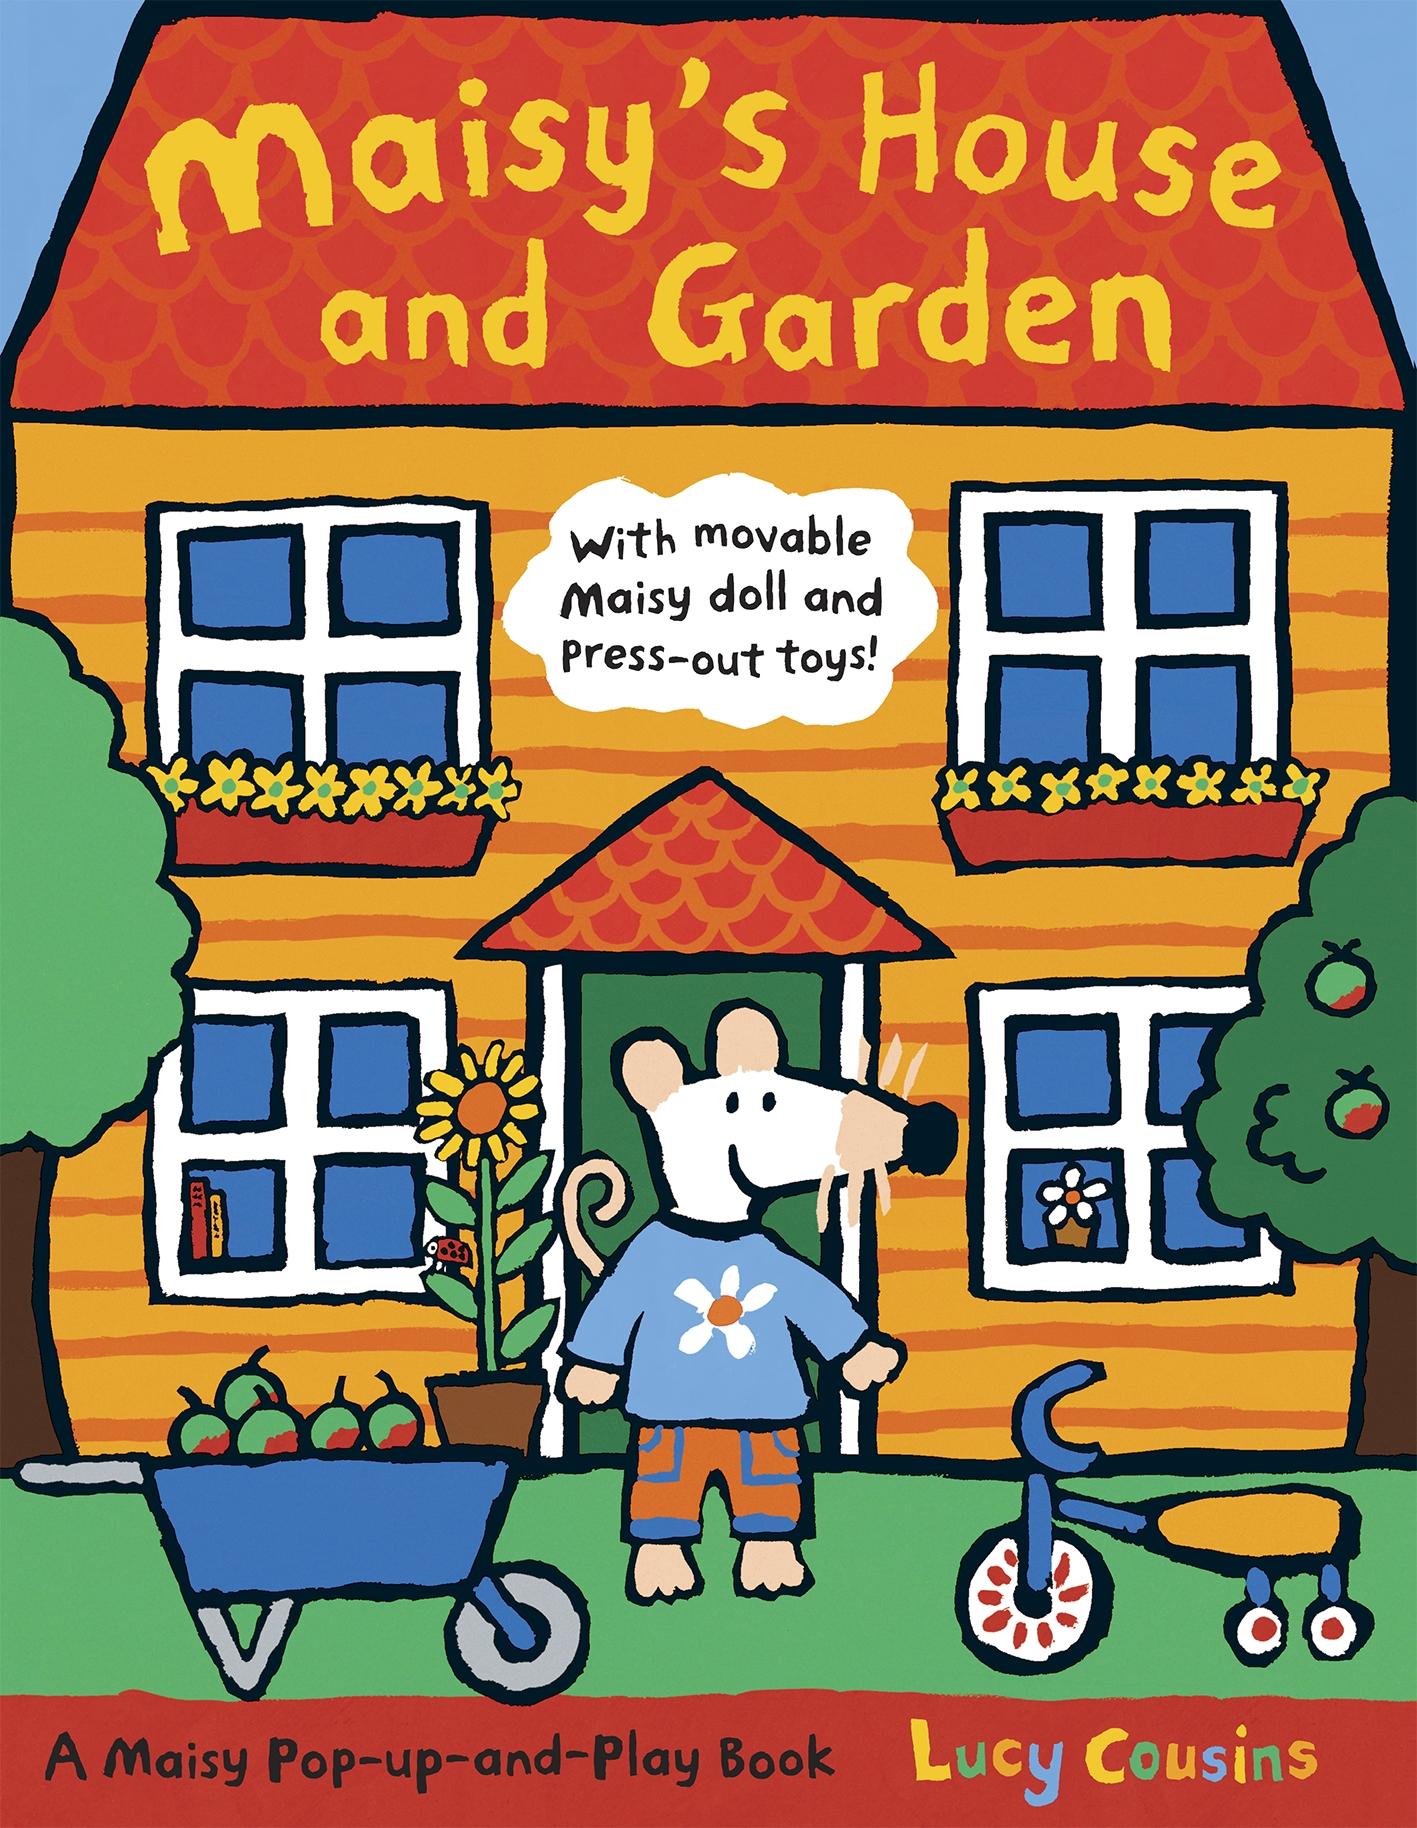 Maisy's House and Garden | A Maisy Pop-up-and-Play Book | Lucy Cousins | Buch | Illustrations | Englisch | 2008 | Walker Books Ltd. | EAN 9781406306613 - Cousins, Lucy